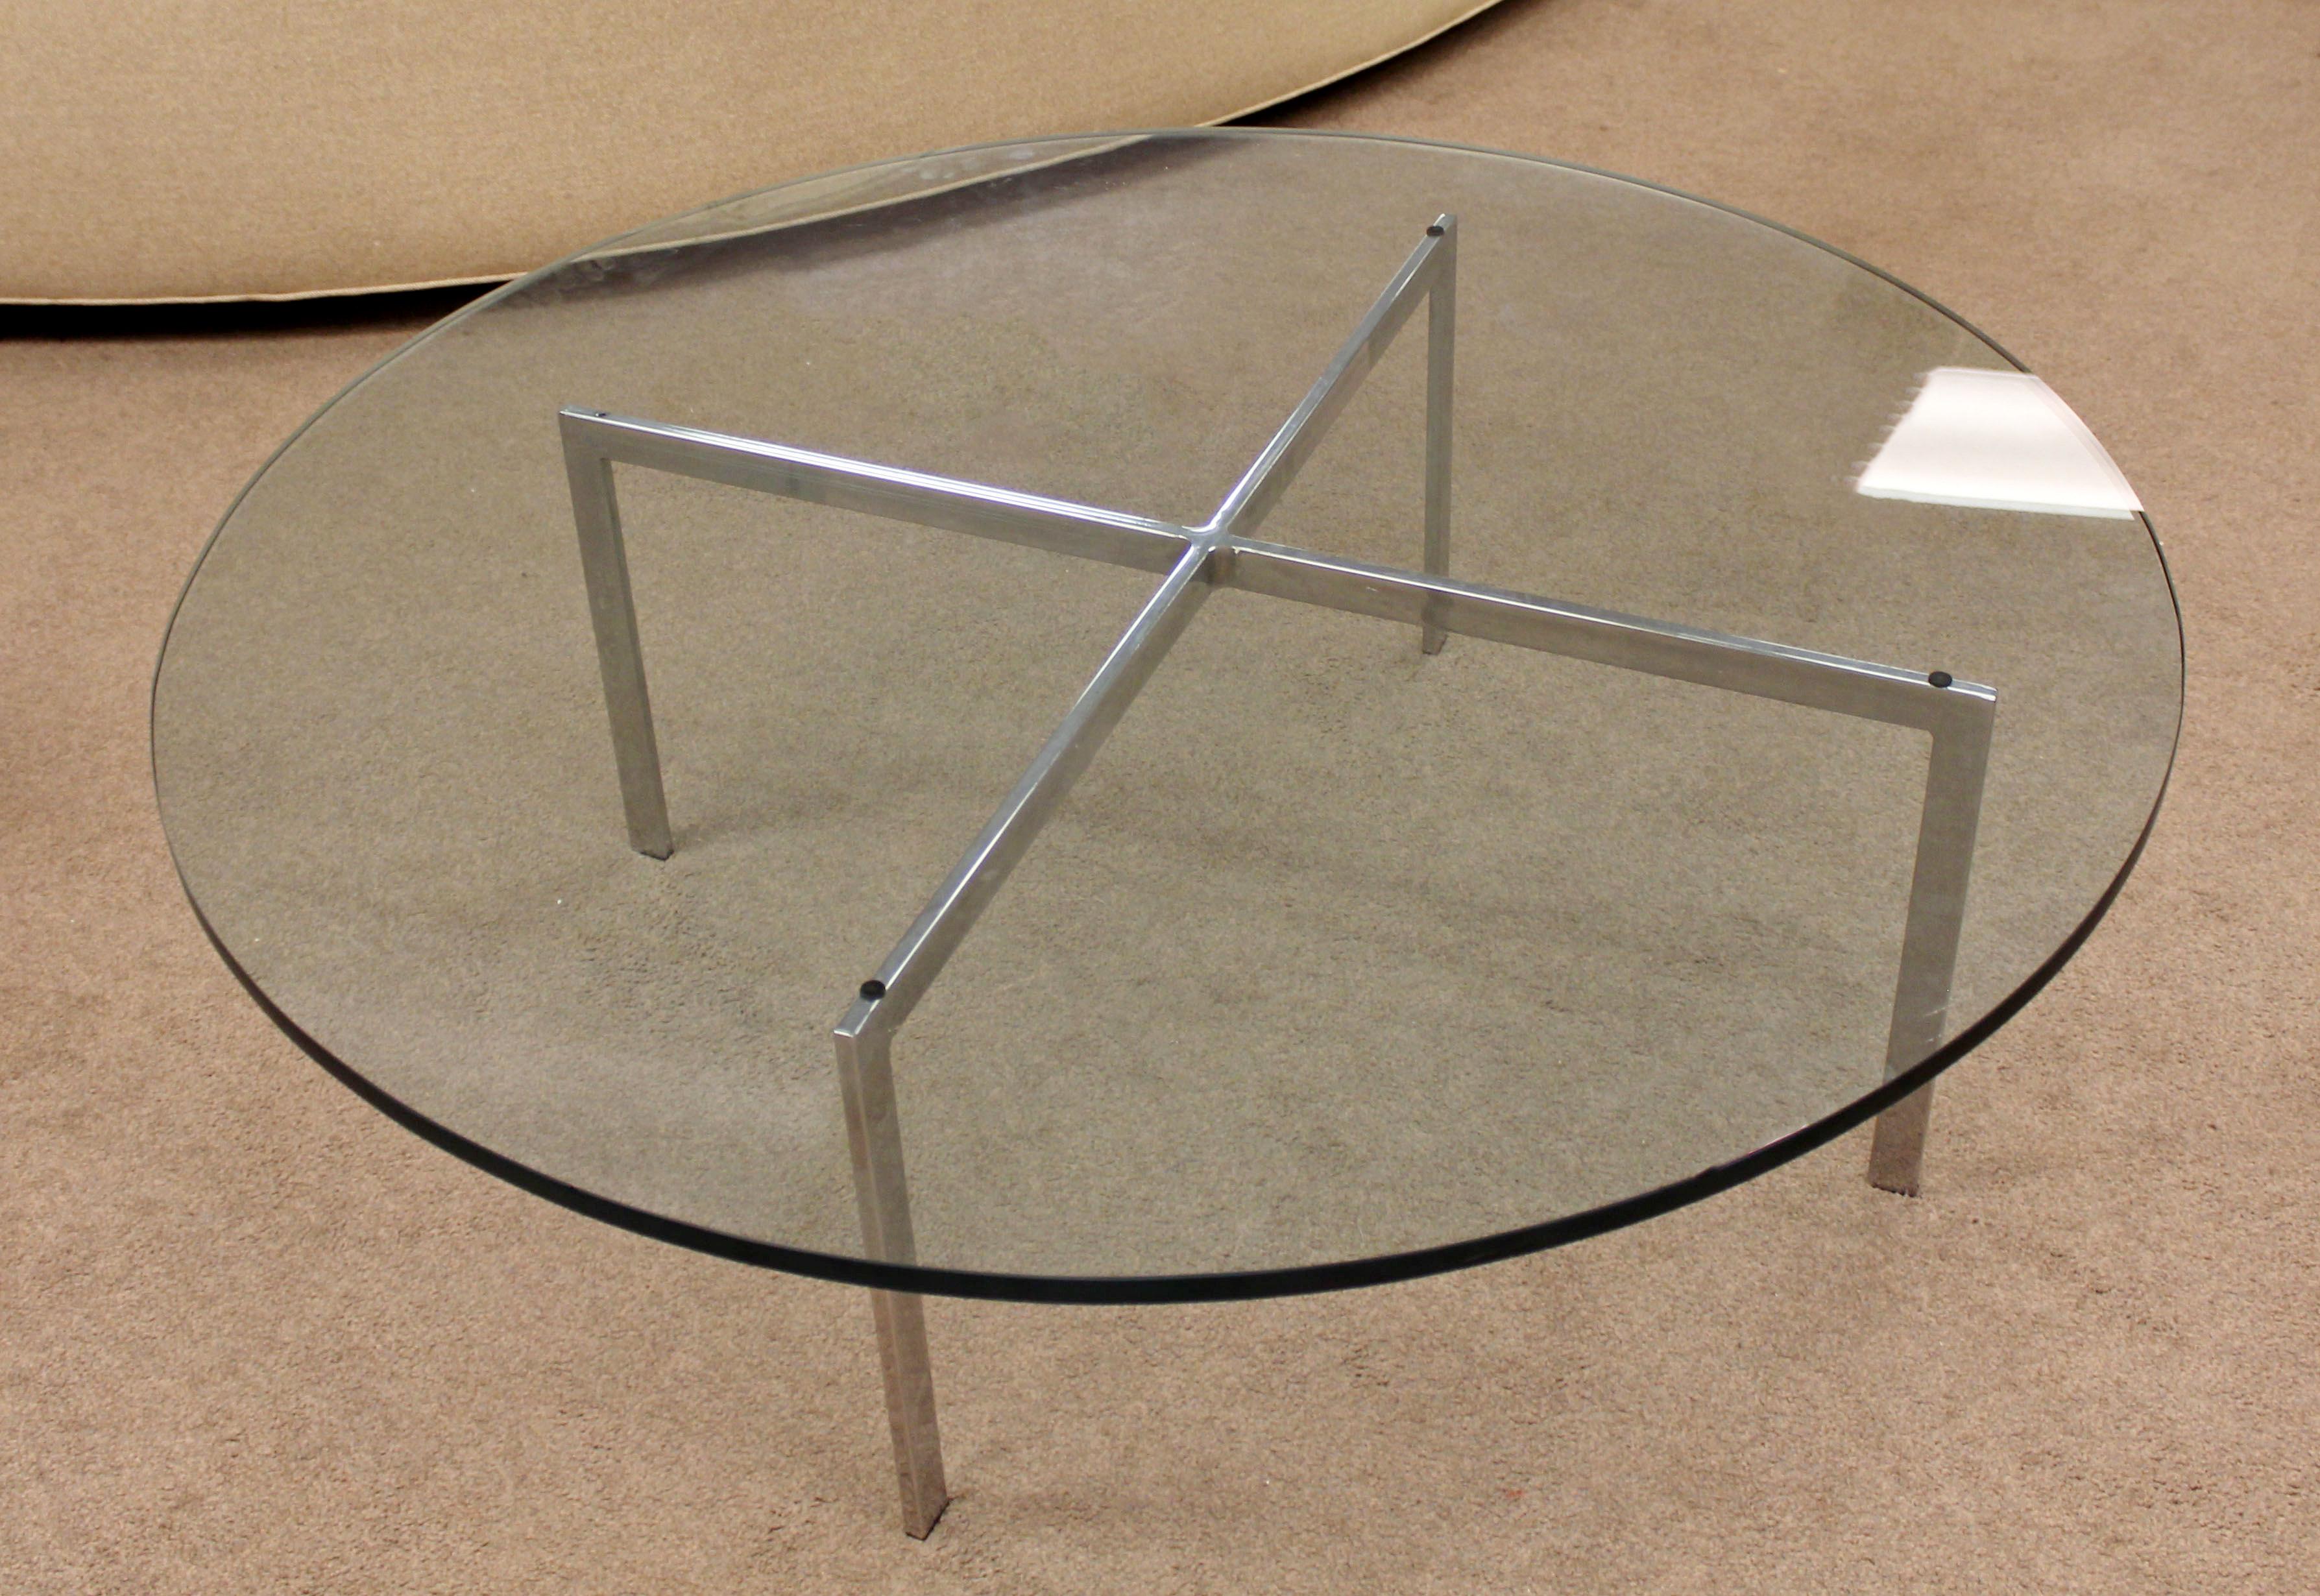 For your consideration is a round version of the Barcelona coffee table, by Ludwig Mies van der Rohe, circa 1970s. In excellent condition. The dimensions are 48